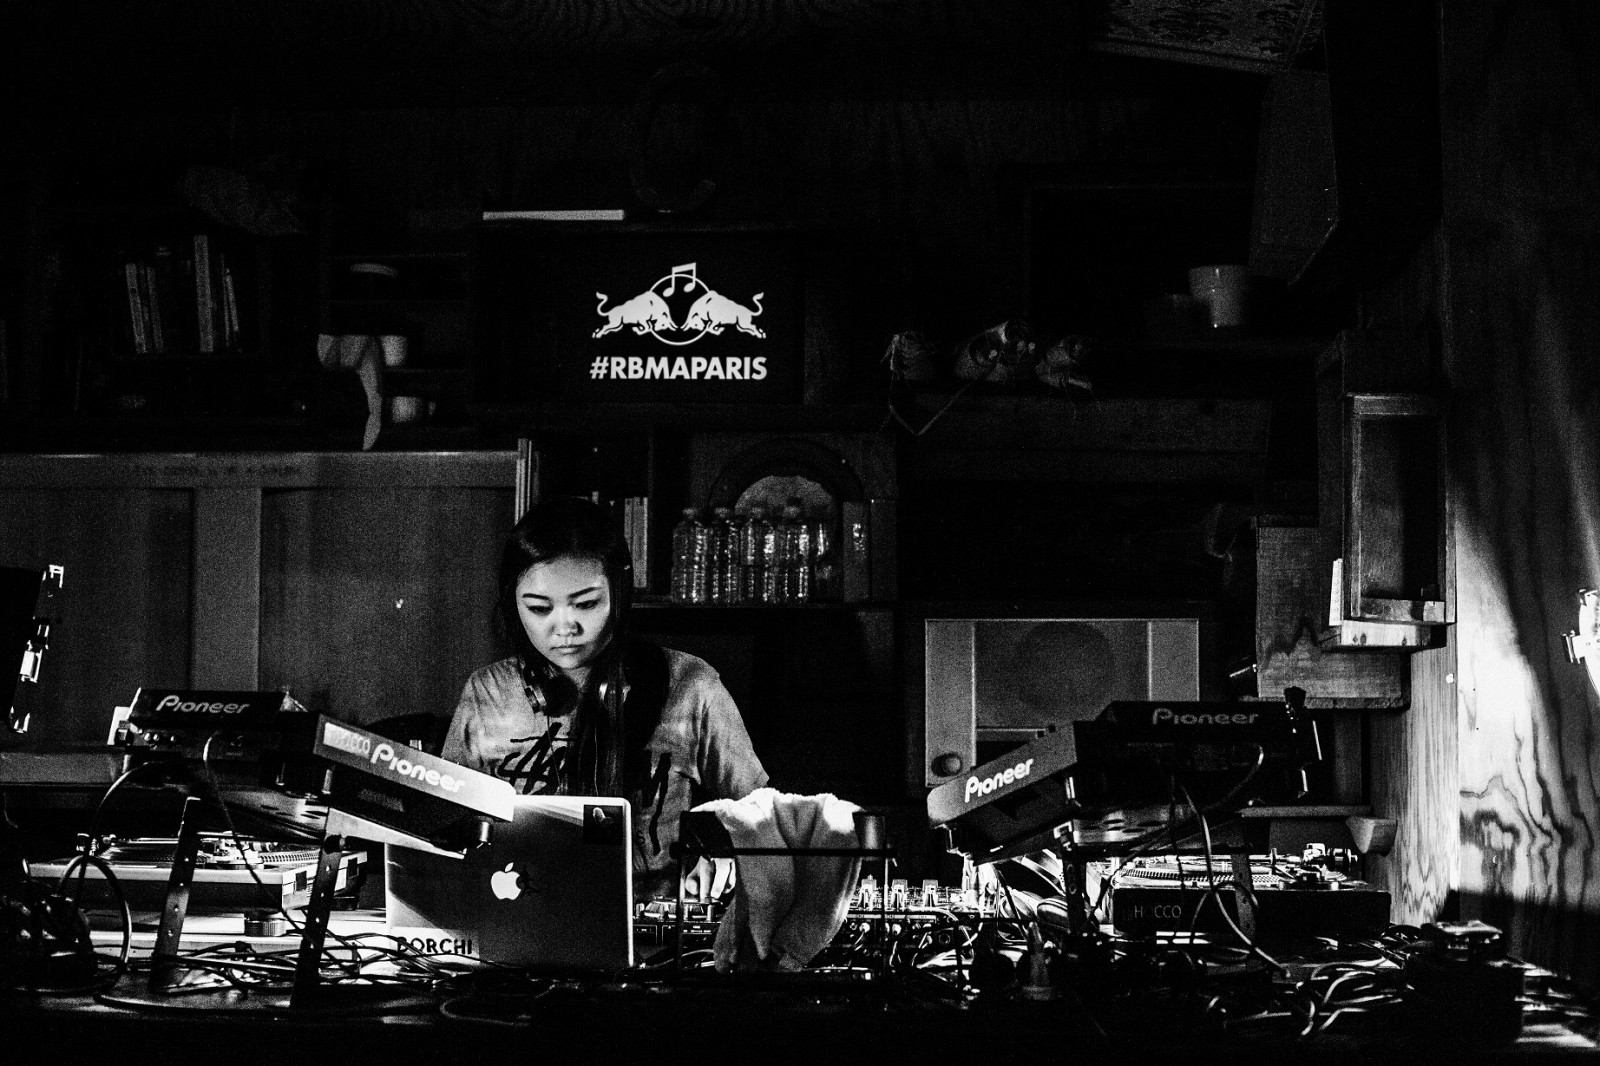 Miso at Revolution 808 during the Red Bull Music Academy in Paris, October 25 to November 27, 2015